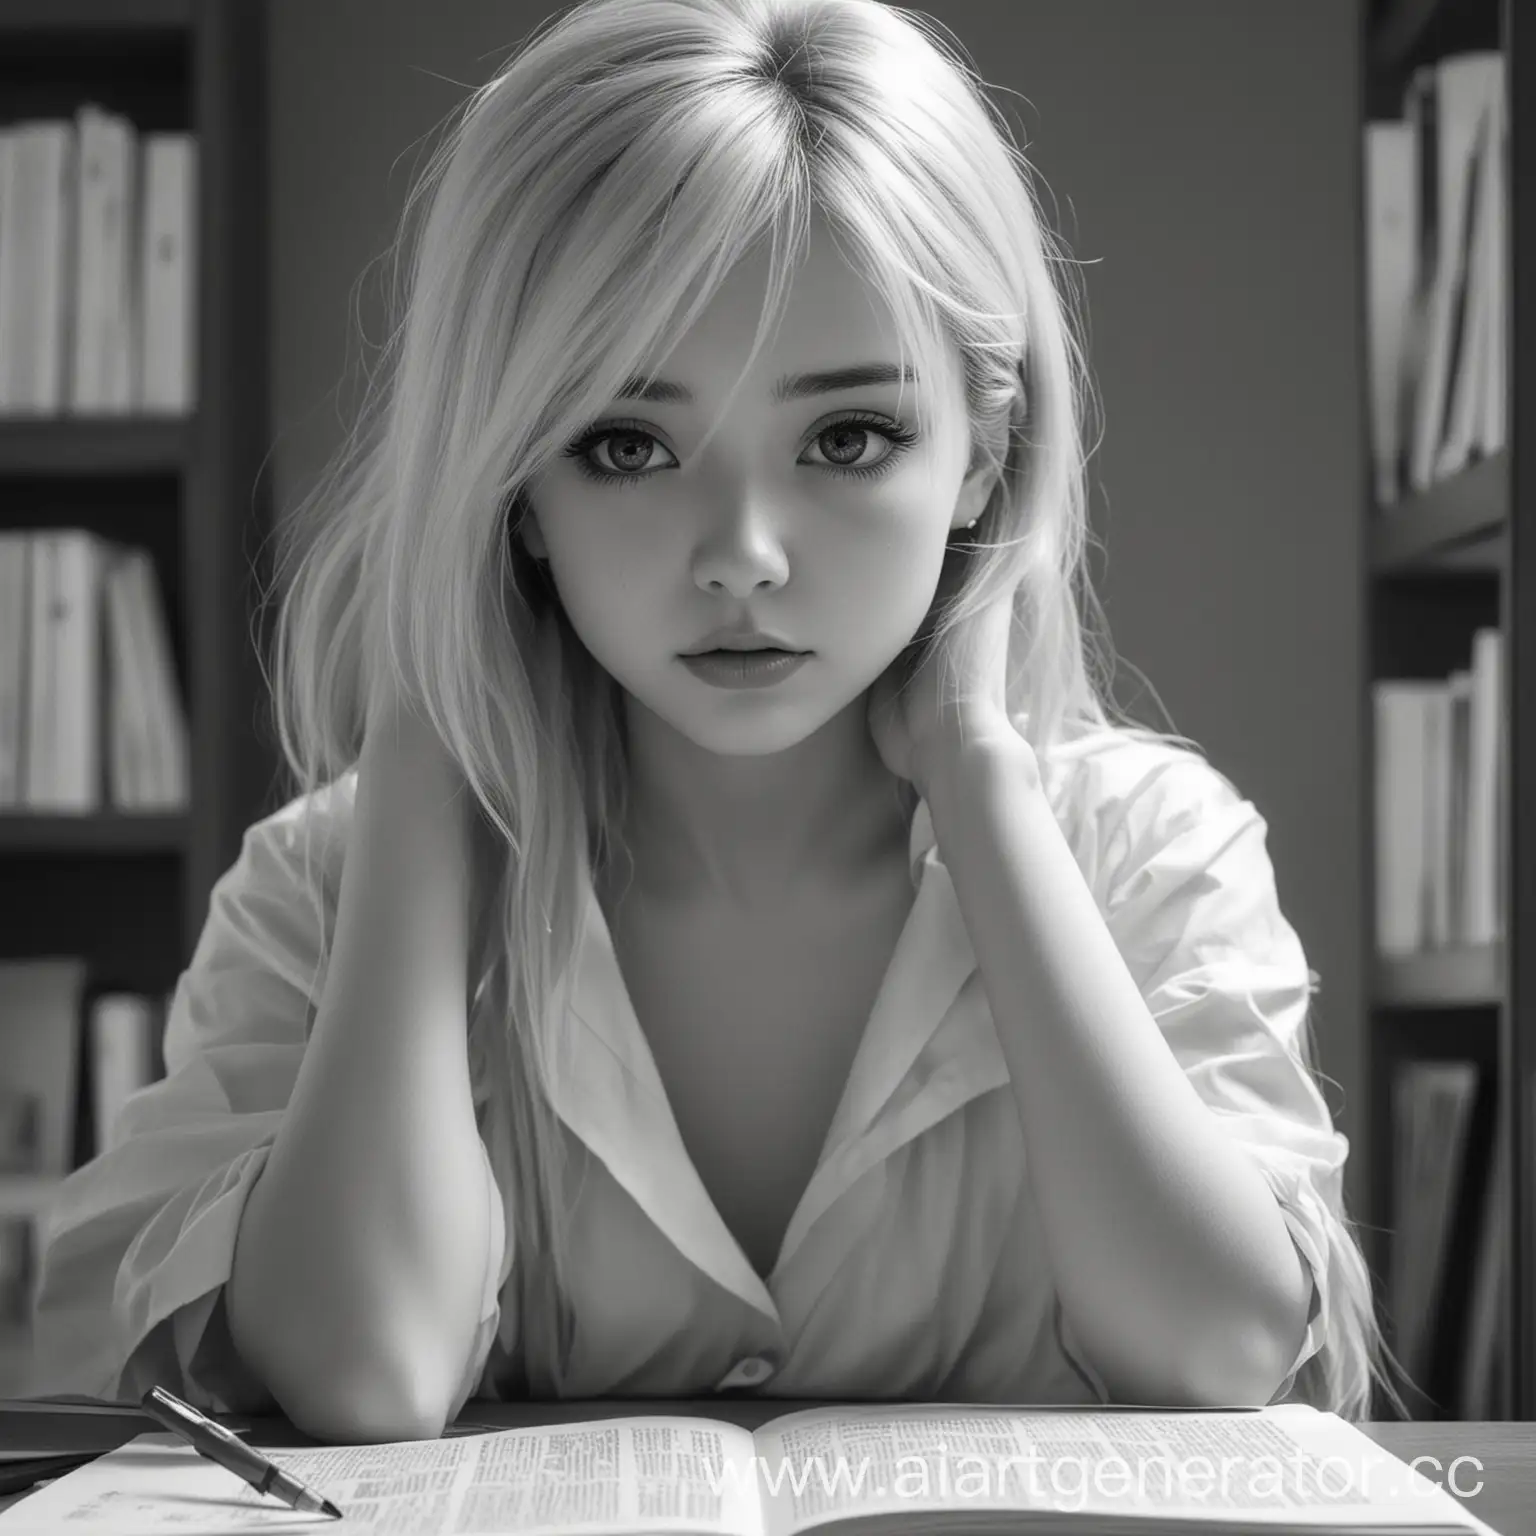 Blondie-Teenager-Distracted-from-Studying-Embracing-Vanity-in-MangaInspired-Monochrome-Scene